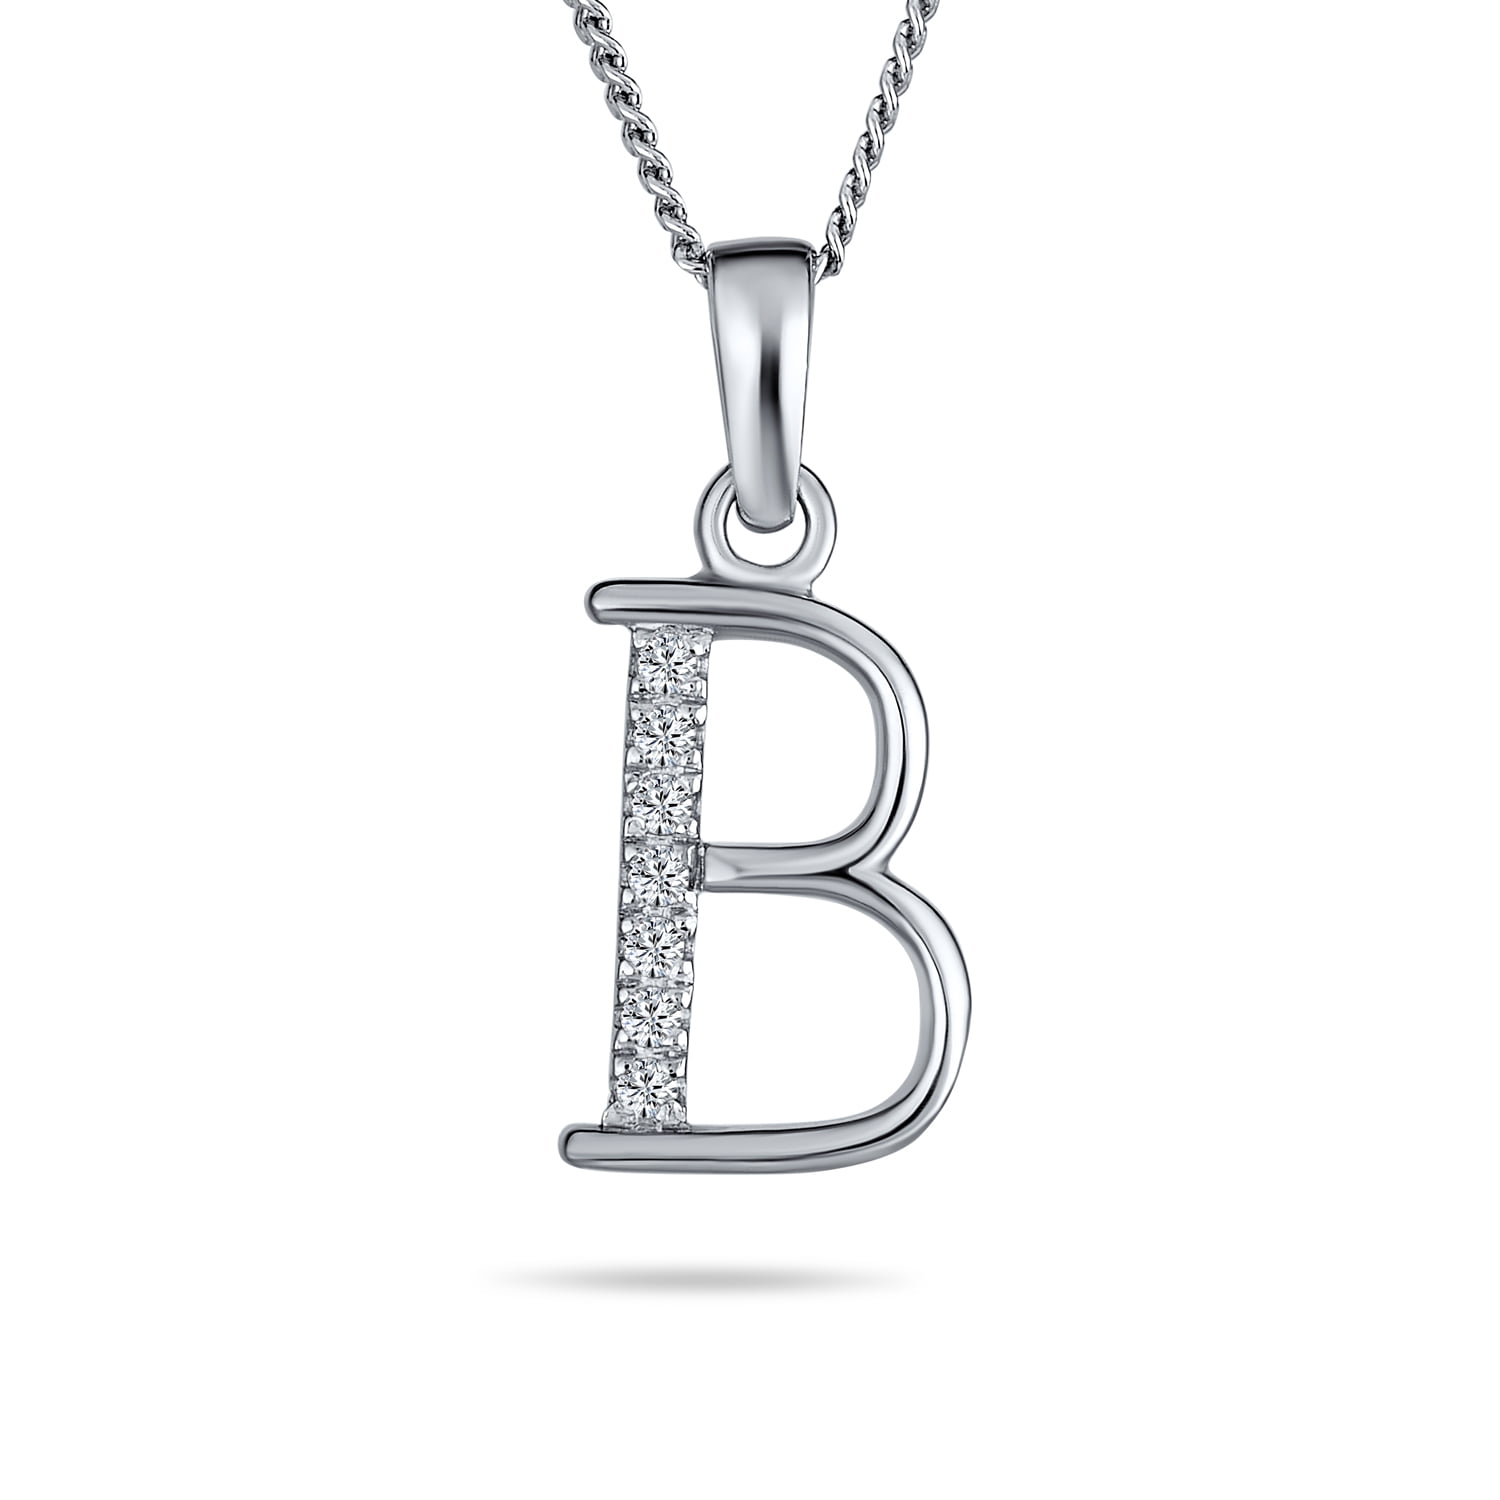 925 Sterling Silver Clear Cubic Zirconia Letter M Initial Pendant So Chic Jewels